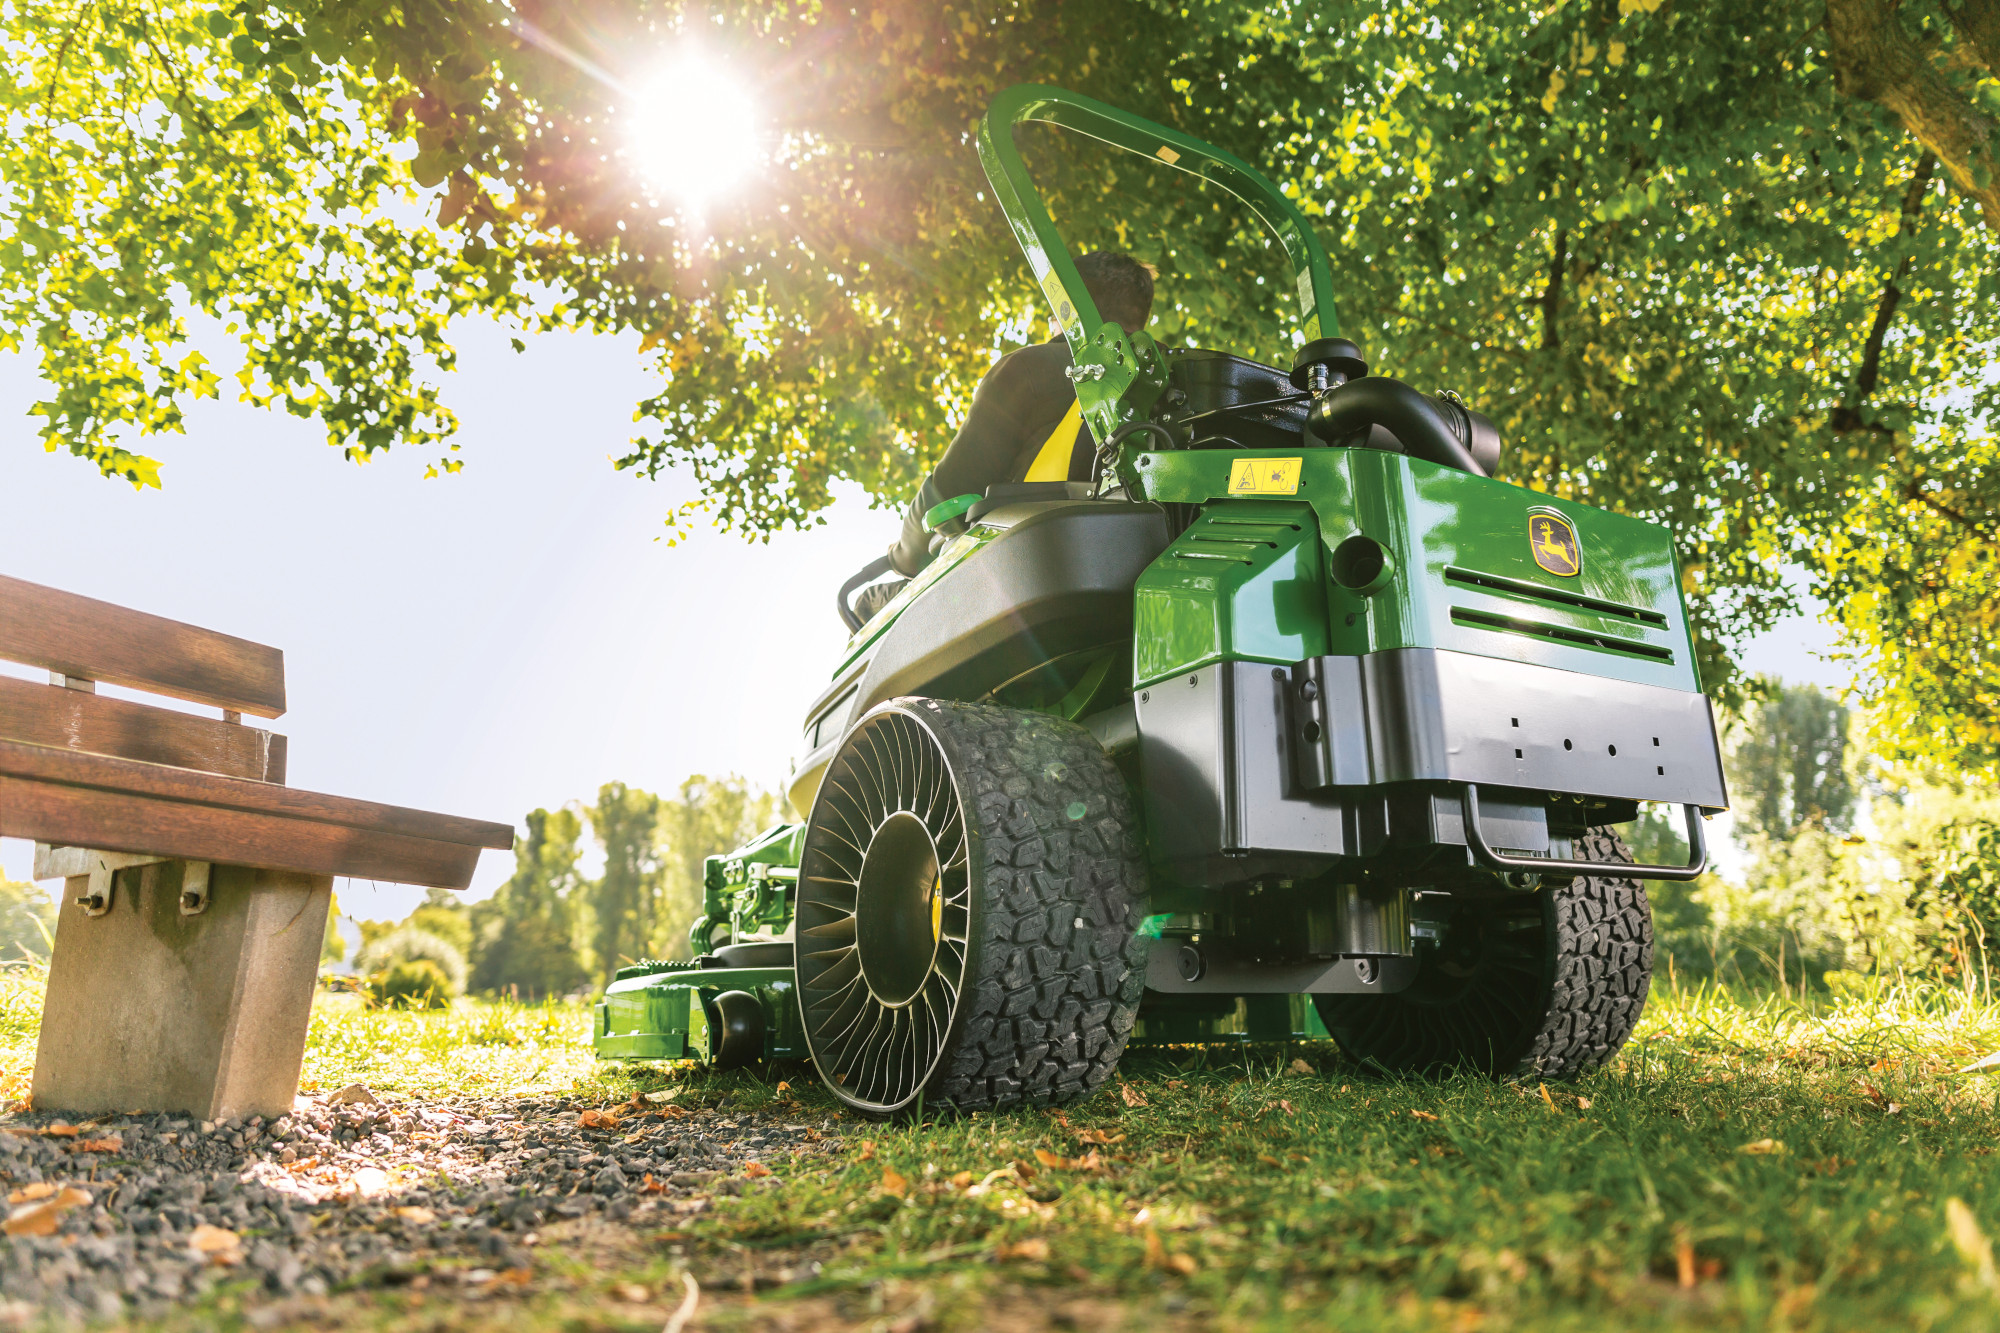 John Deere ZTRAK Commercial Mowers - A wise investment